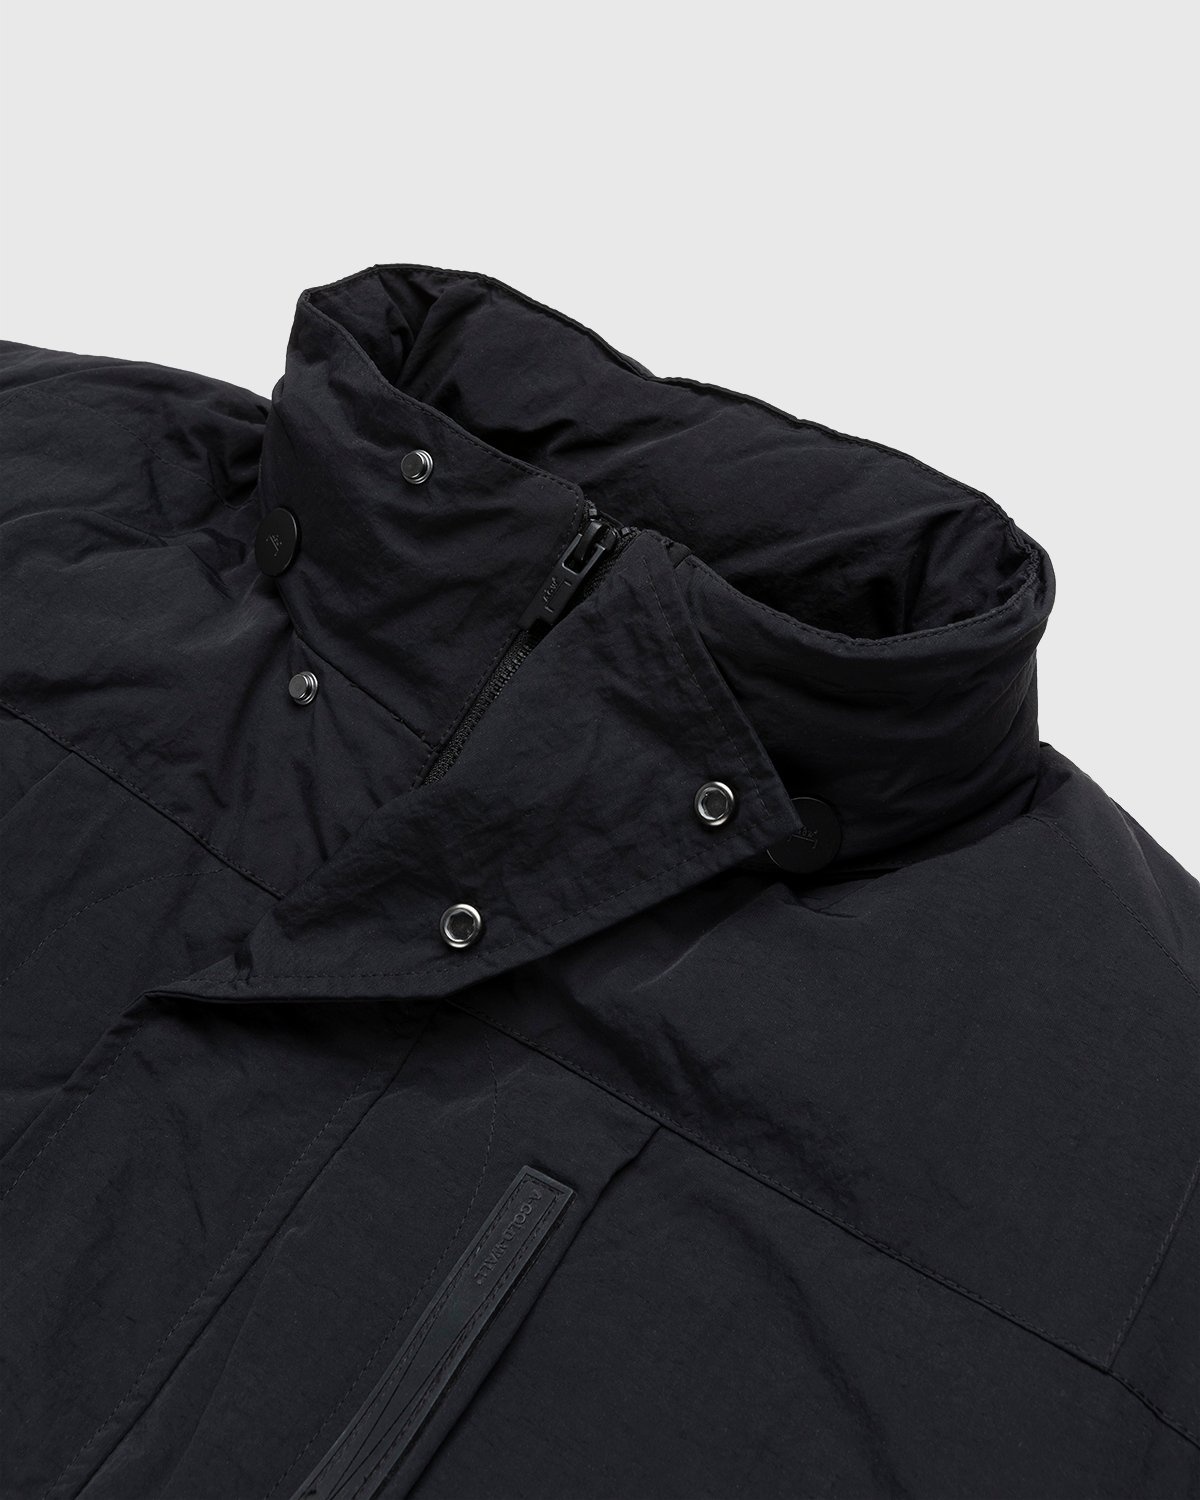 A-Cold-Wall* – Cirrus Jacket Black - Outerwear - Black - Image 3